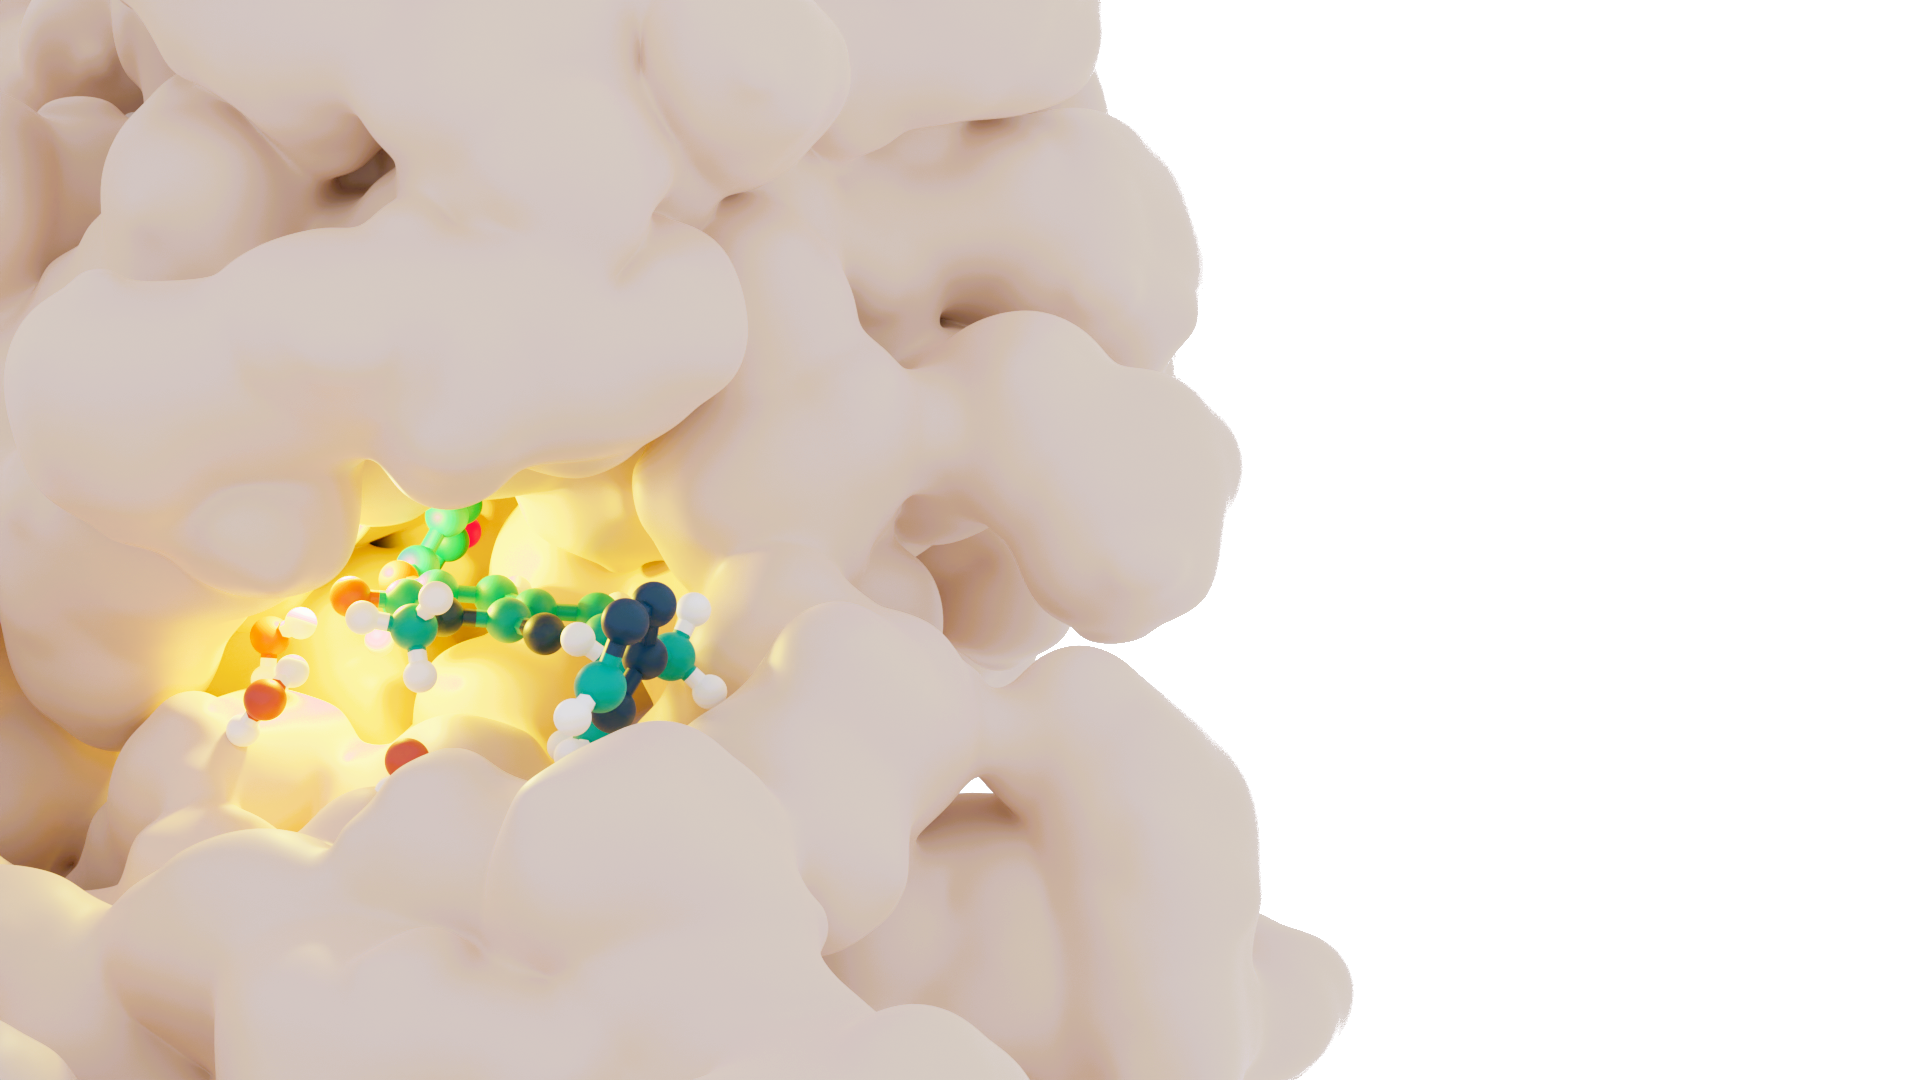 Ligand in the binding pocket of a protein